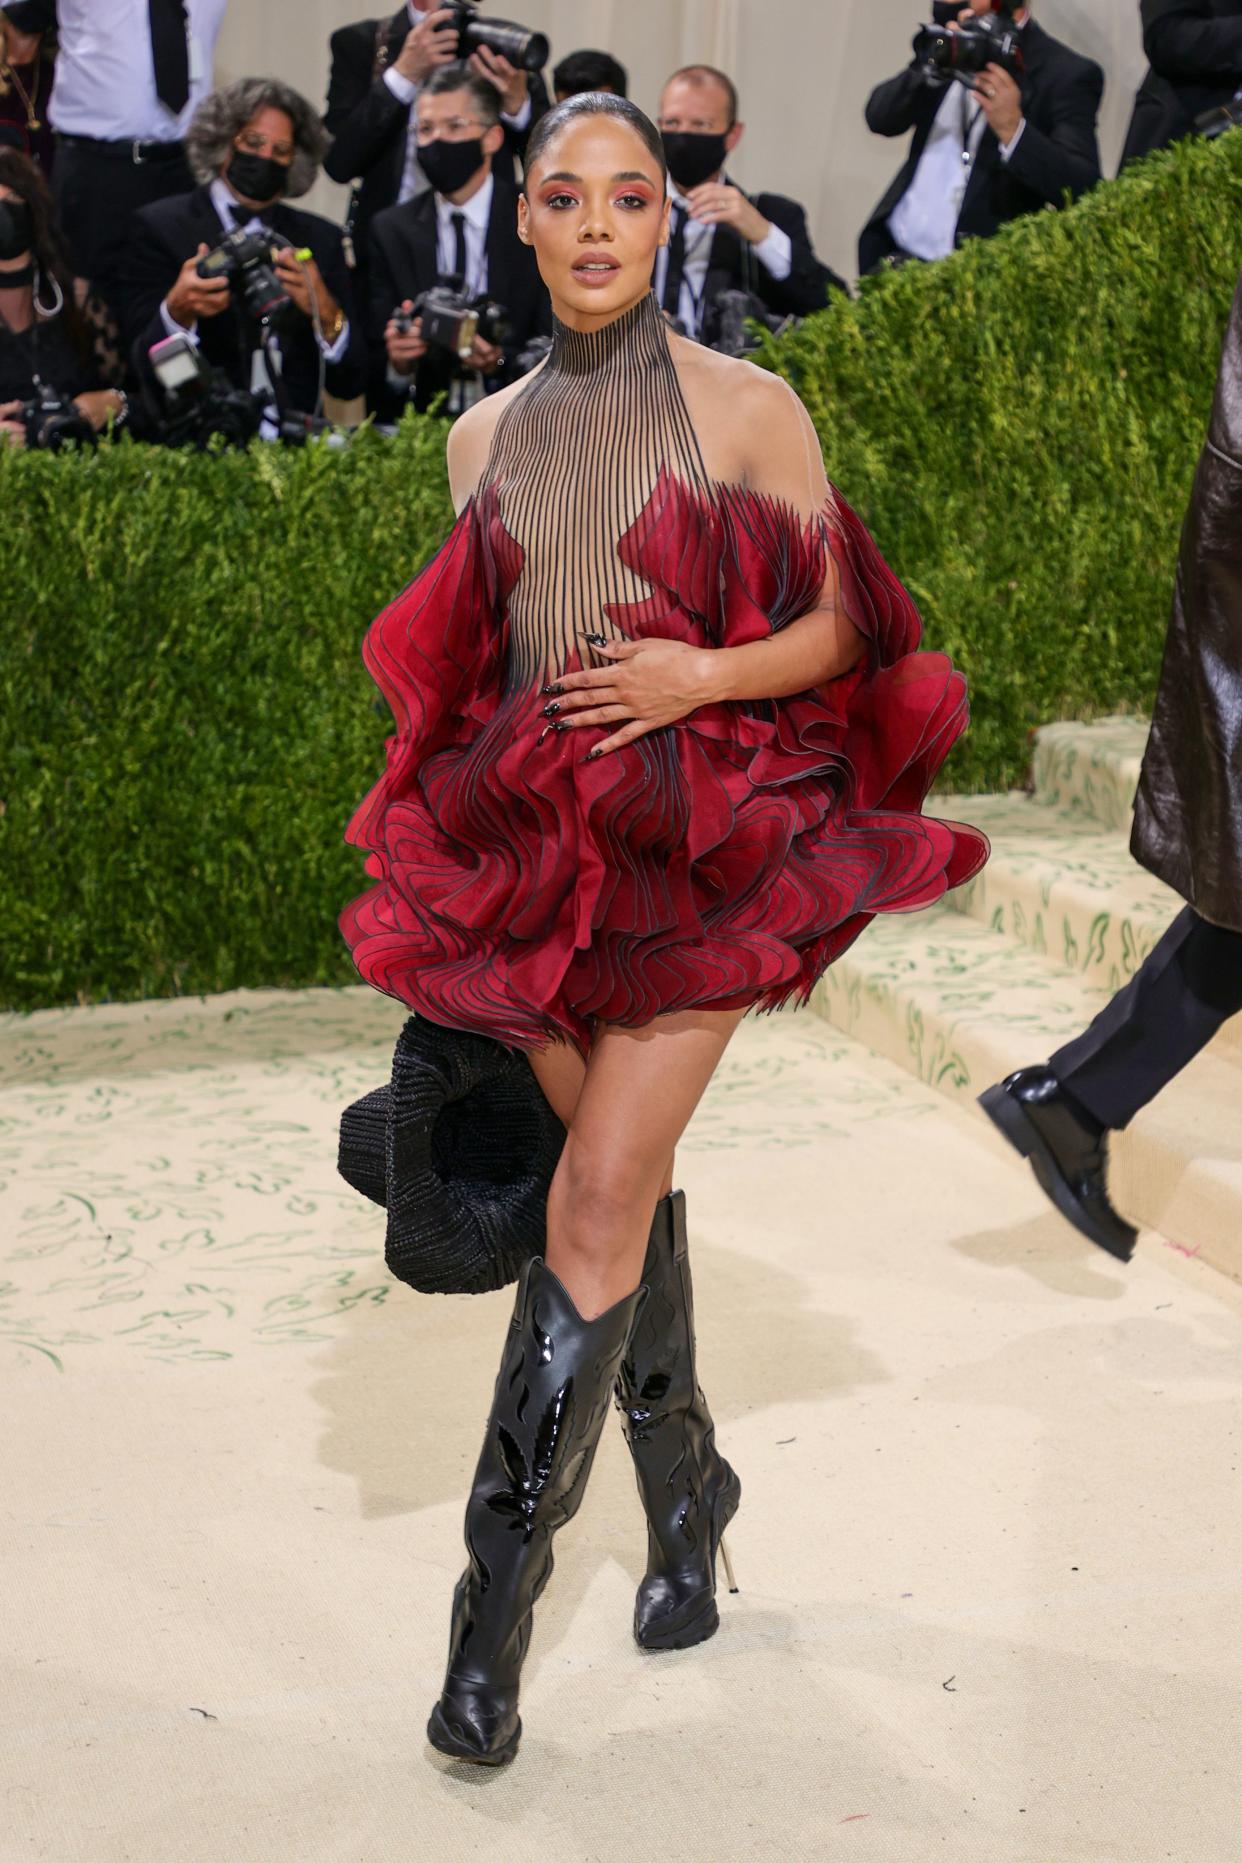 Tessa Thompson attends The 2021 Met Gala Celebrating In America: A Lexicon Of Fashion at Metropolitan Museum of Art on Sept. 13, 2021 in New York.